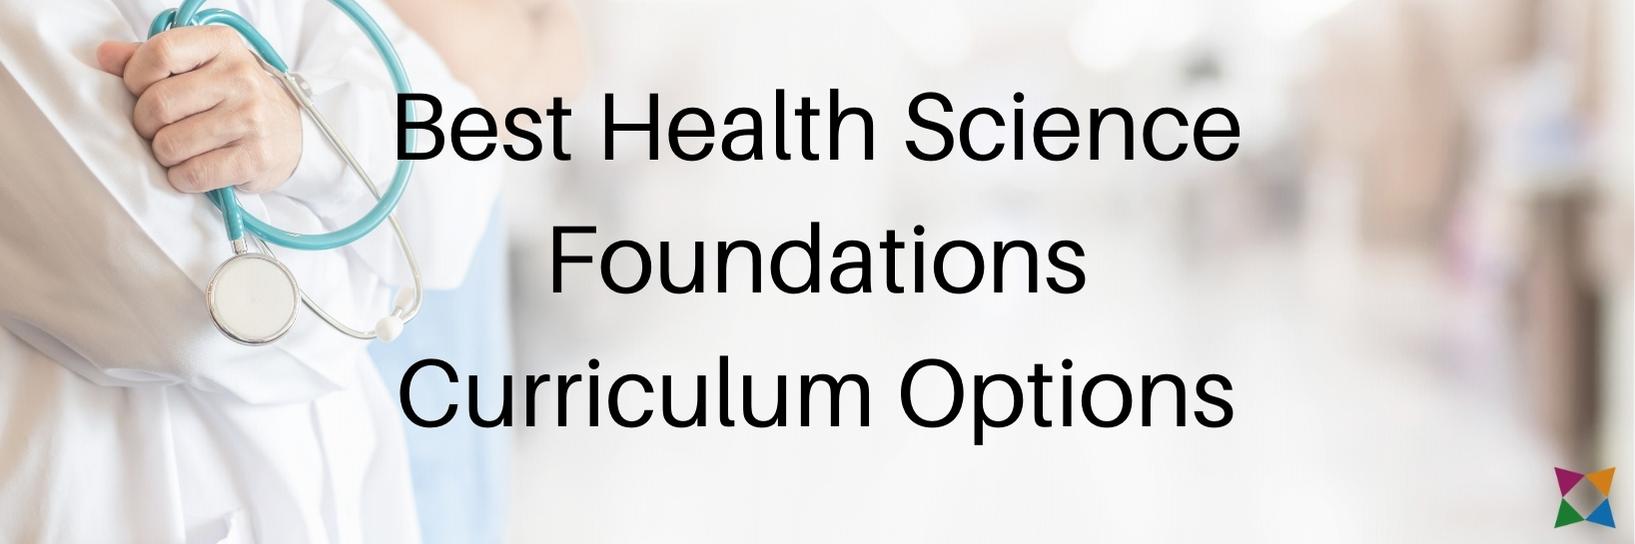 Health Science Foundations: 4 Best Curriculum Options